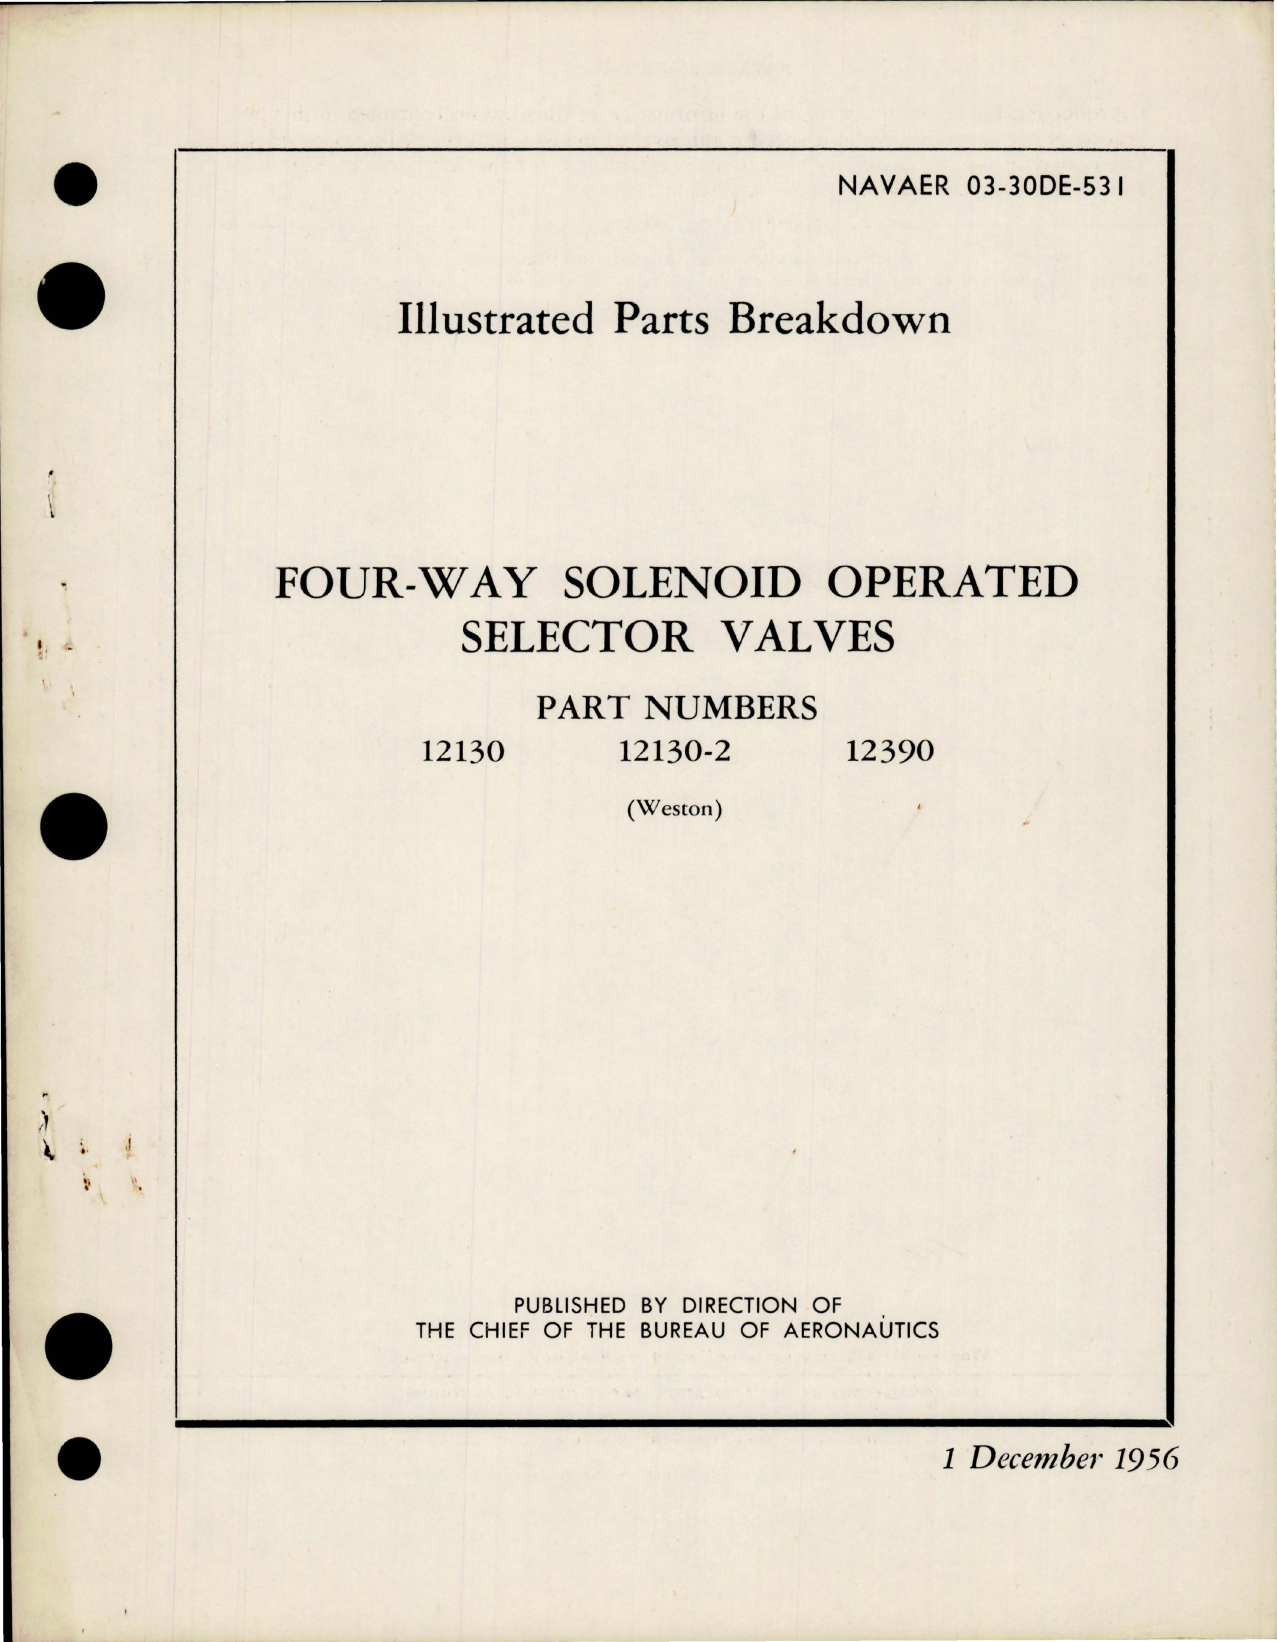 Sample page 1 from AirCorps Library document: Illustrated Parts Breakdown for Four-Way Solenoid Operated Selector Valves - Parts 12130, 12130-2 and 12390 